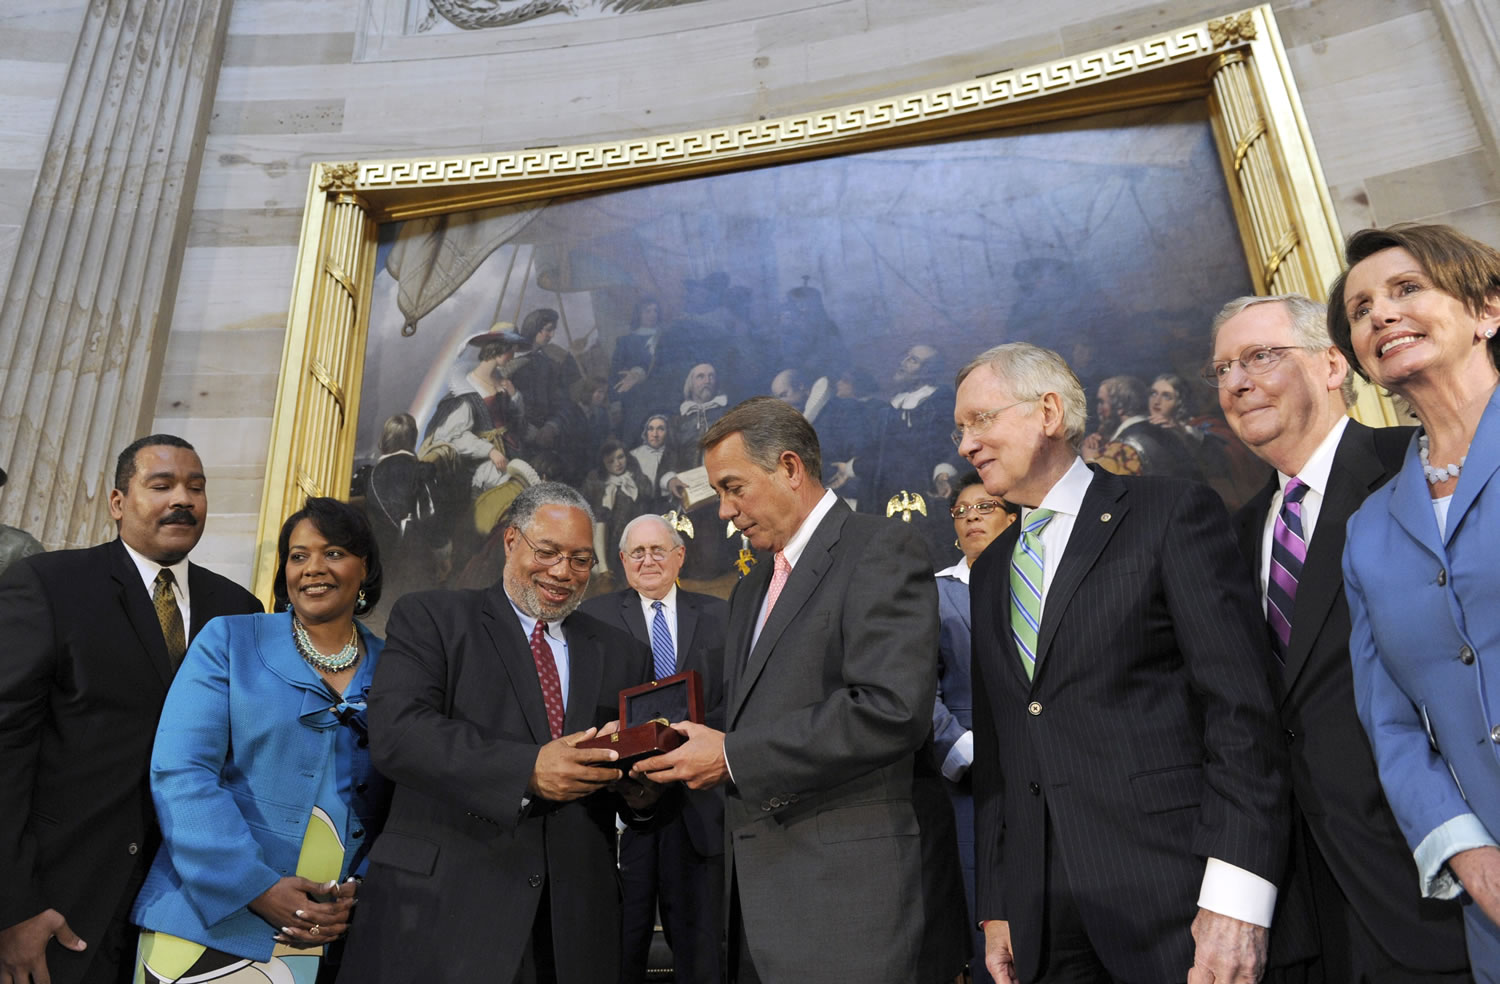 House Speaker John Boehner presents historian Lonnie Bunch III with a Congressional Gold Medal in honor of Dr. and Mrs. Martin Luther King Jr.